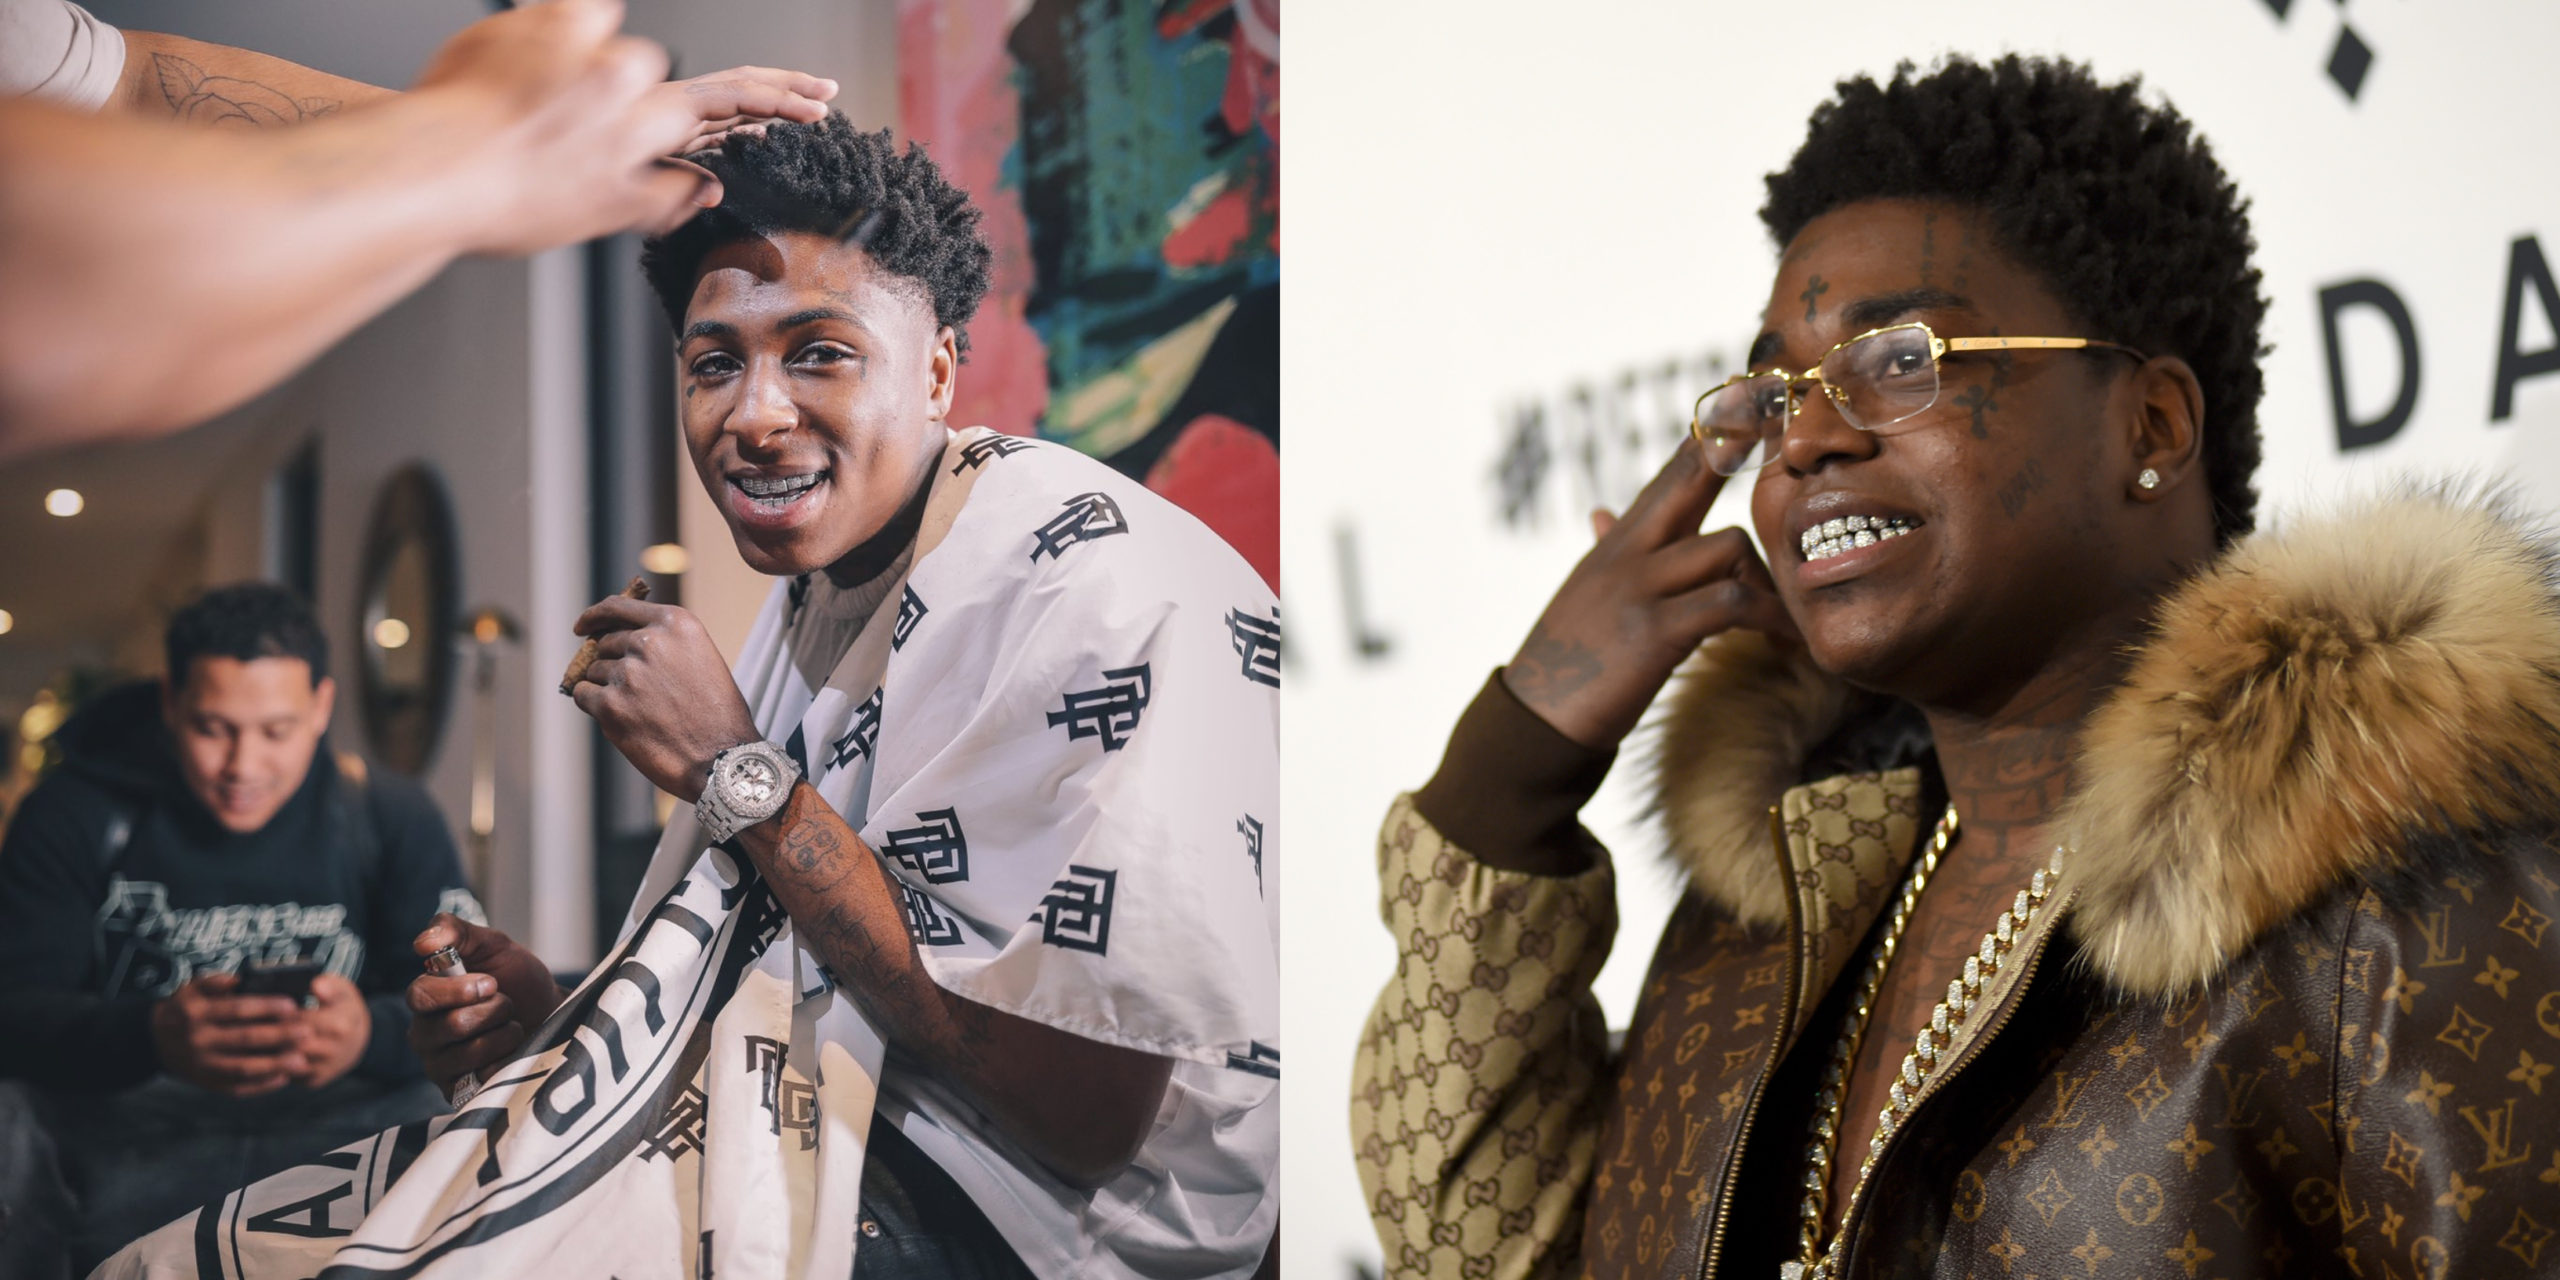 NBA YoungBoy Responds to Kodak Black's Comments About his 'Wife' Yaya Mayweather